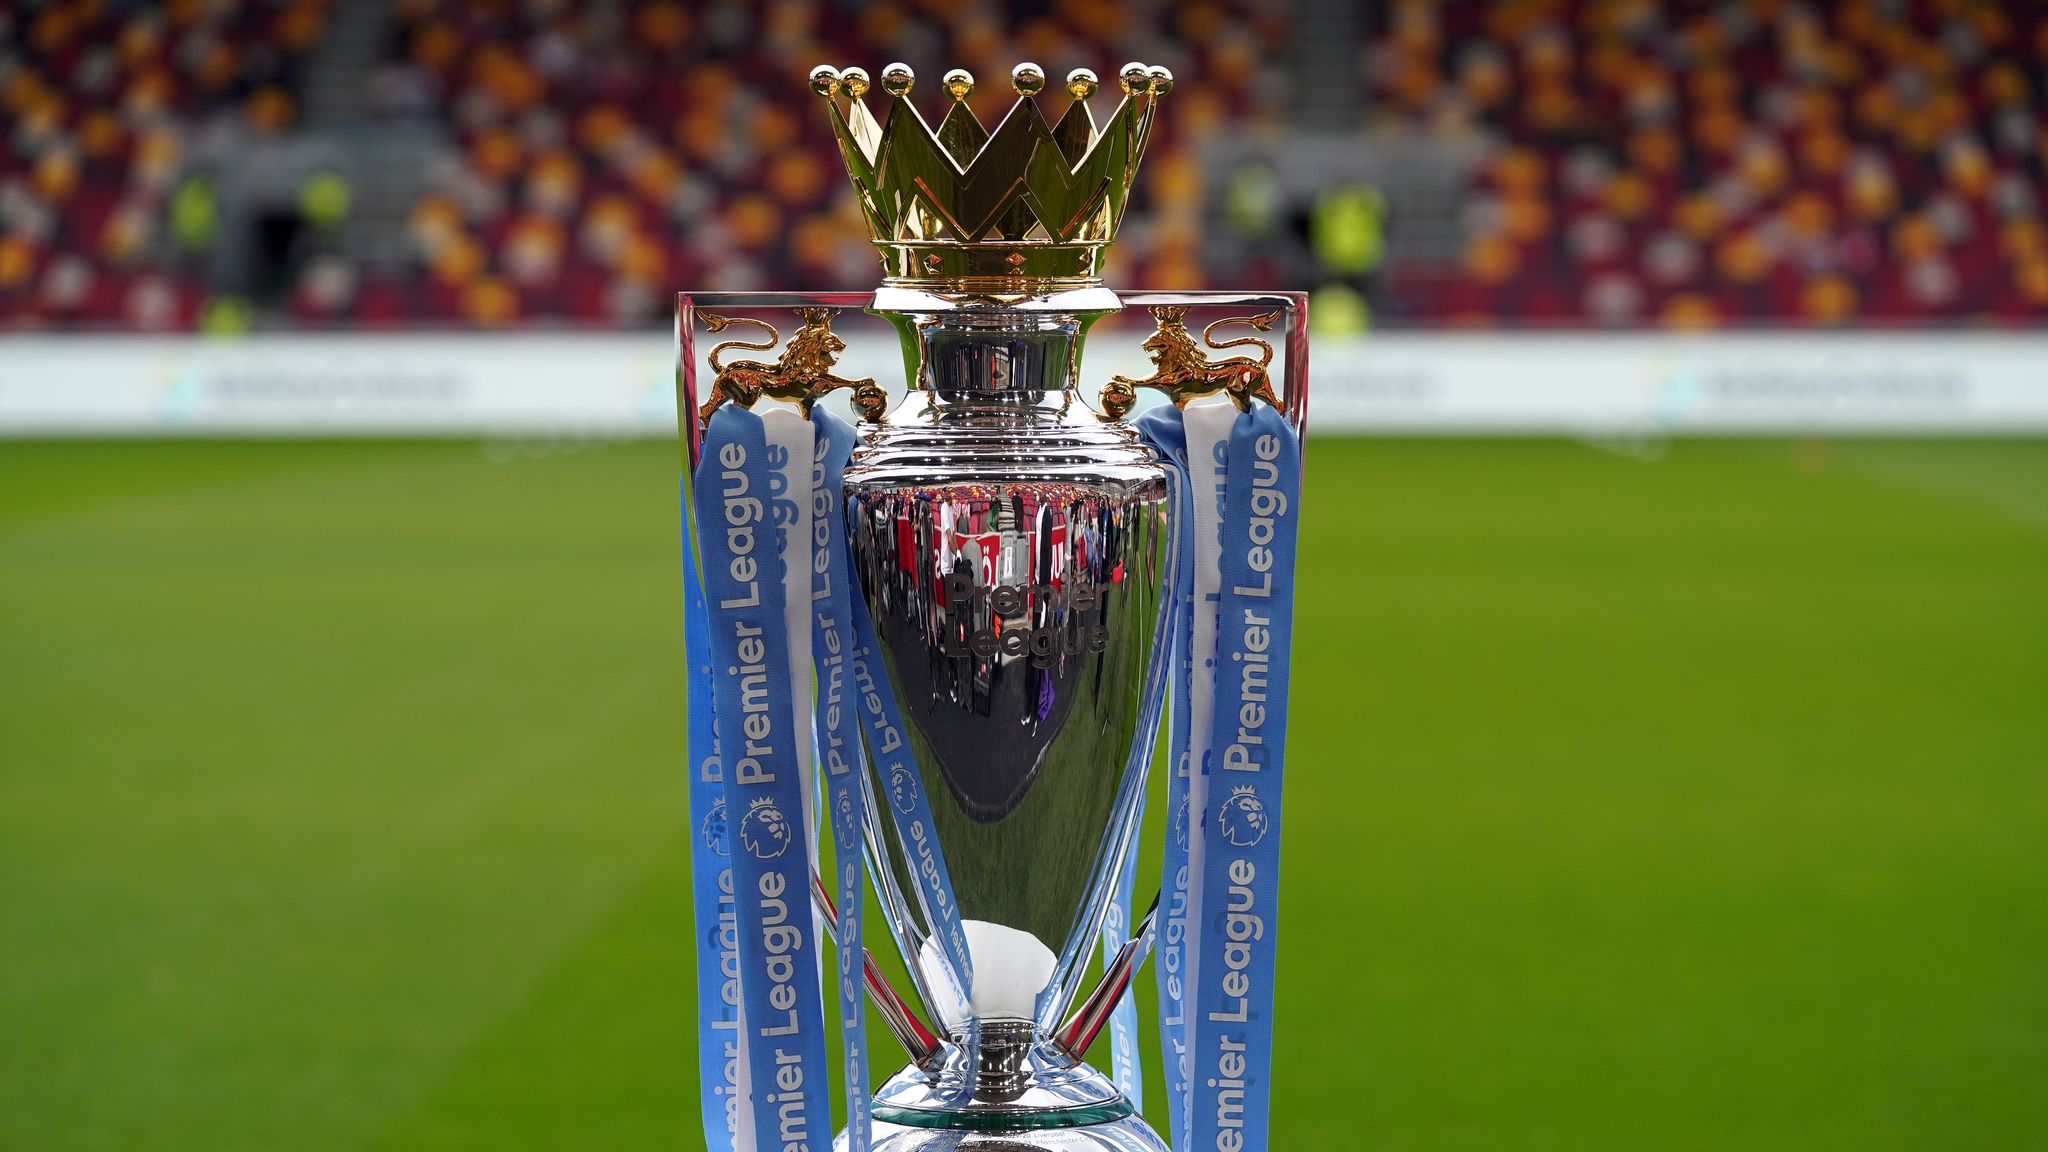 Sky Sports Cup Final to be Played on Sunday 24th March